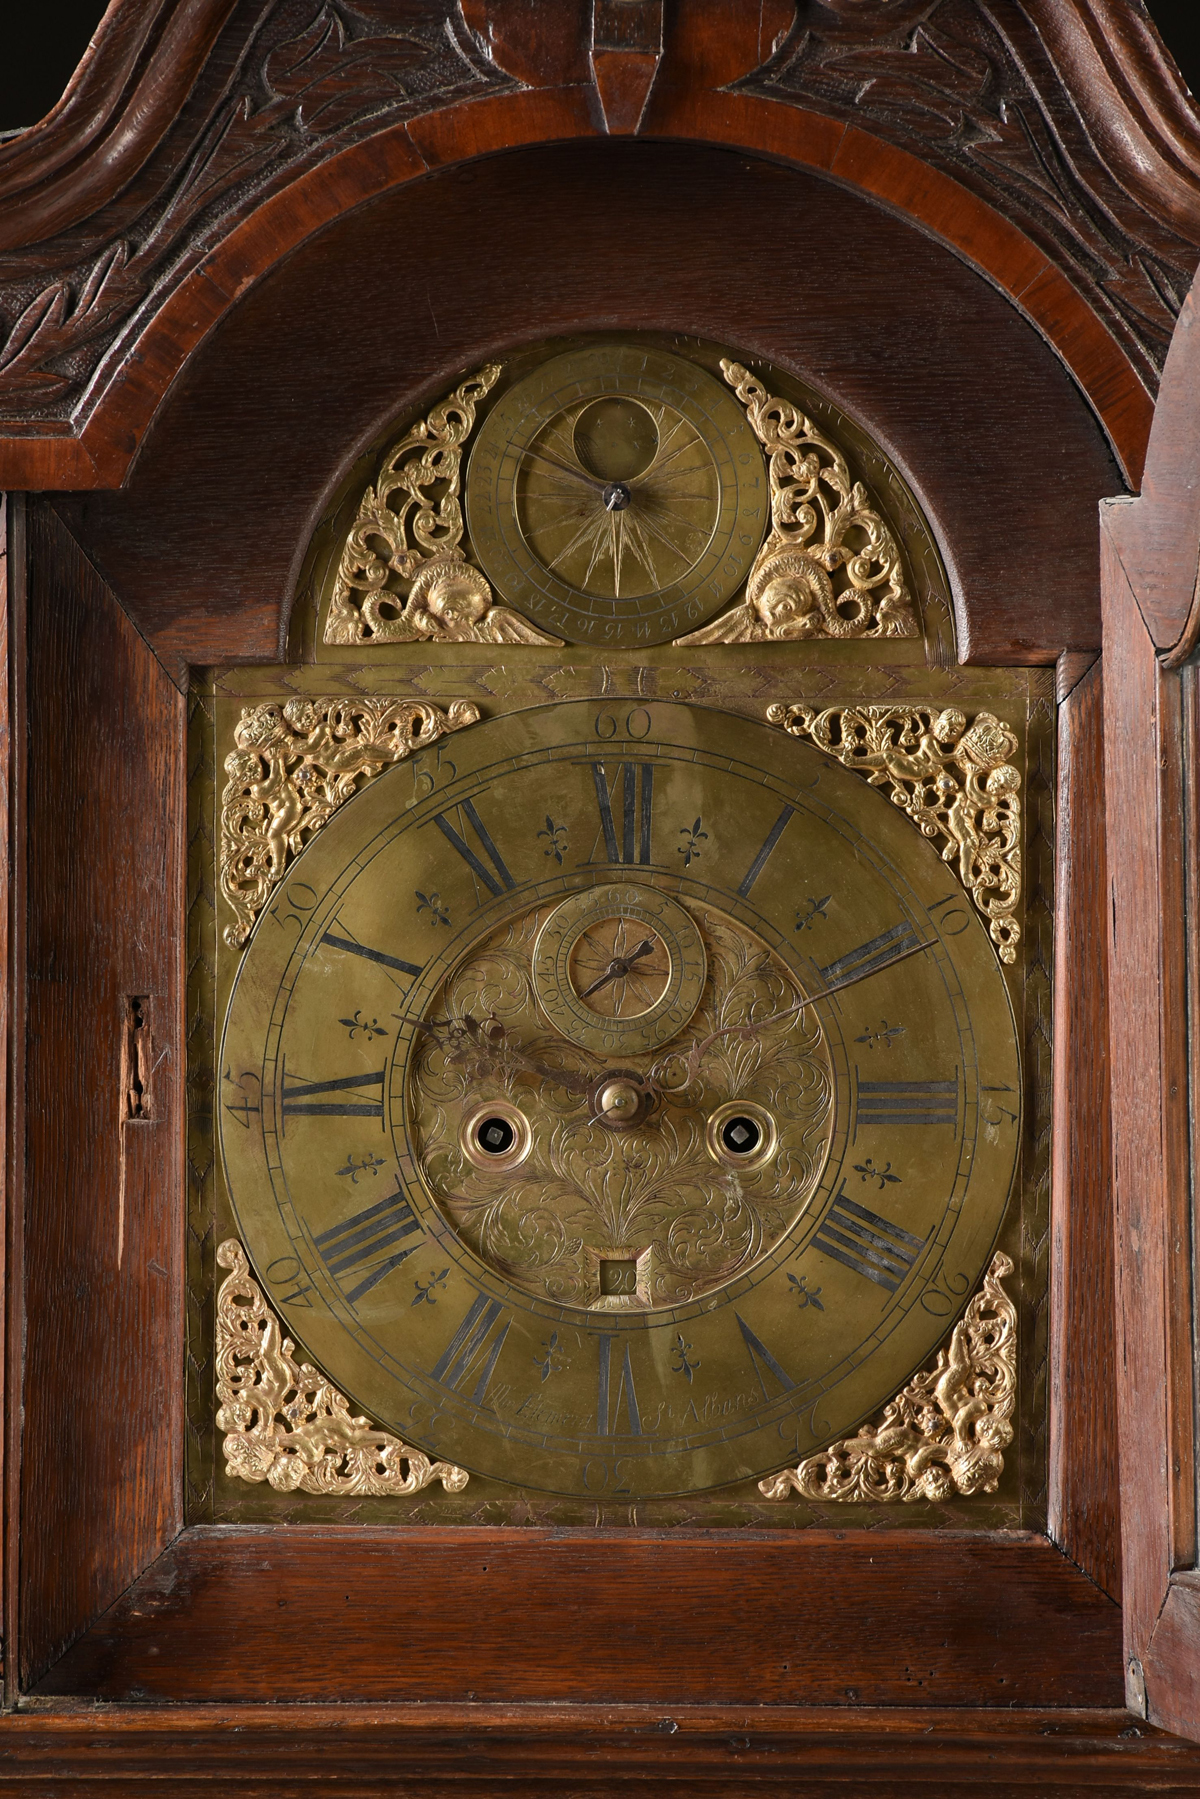 AN ENGLISH GOTHIC STYLE OAK TALL CASE CLOCK, WORKS BY WILLIAM ELEMENT, ST. ALBANS, 17TH/18TH - Image 3 of 10